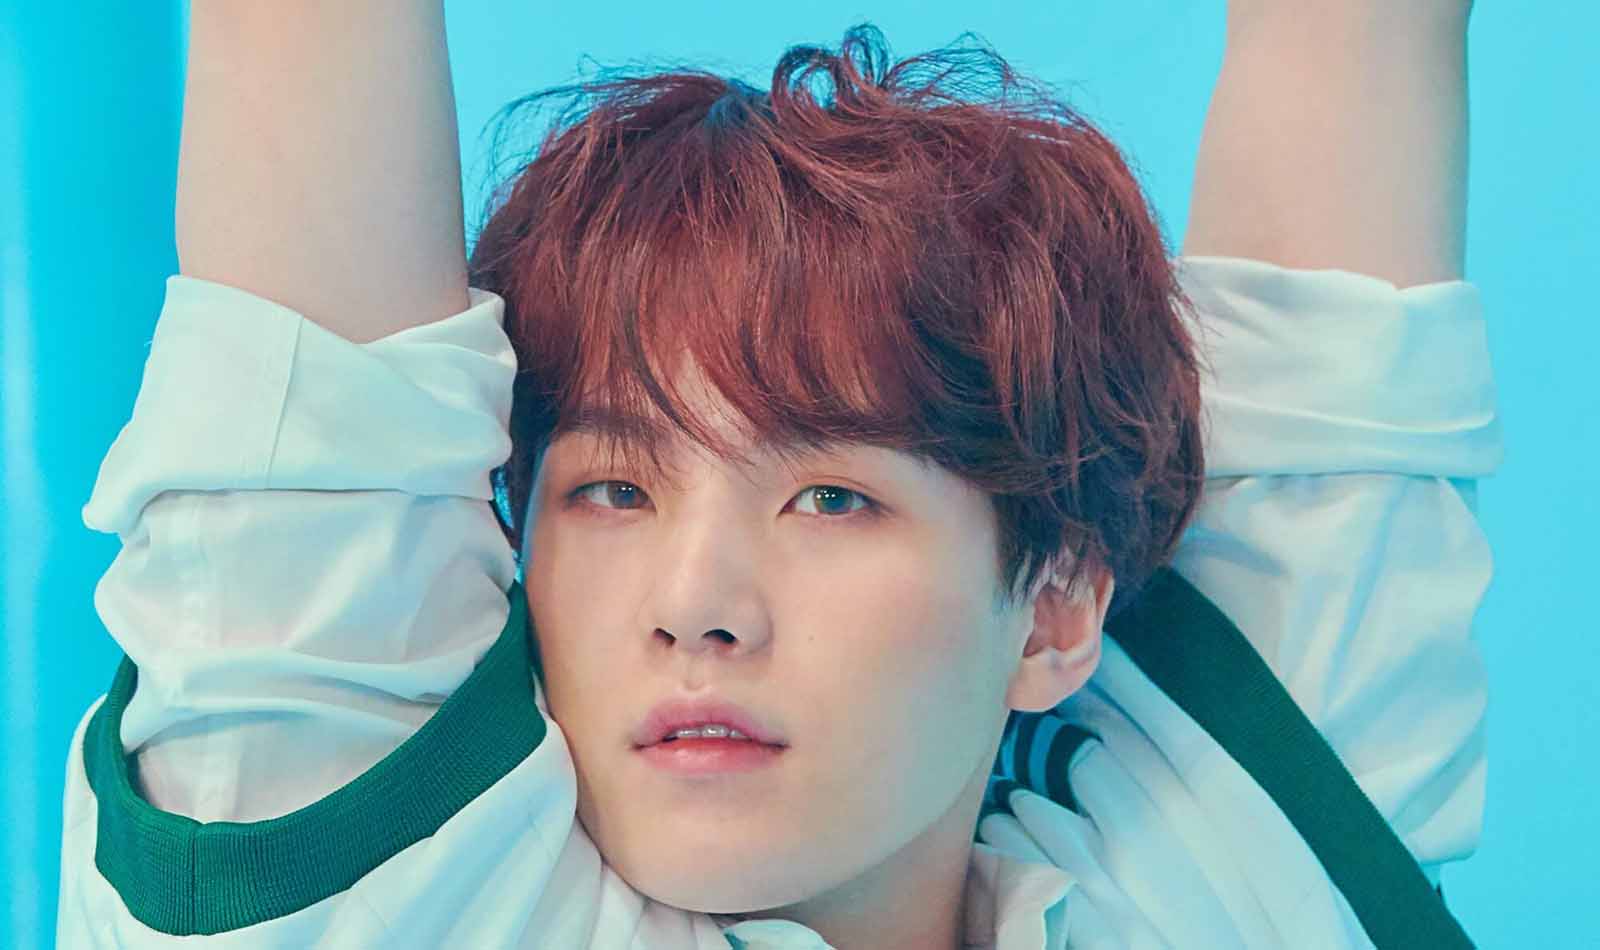 Suga from BTS recently just got shoulder surgery, taking him out of action for 'BE' promotions. Why did Suga need surgery though?